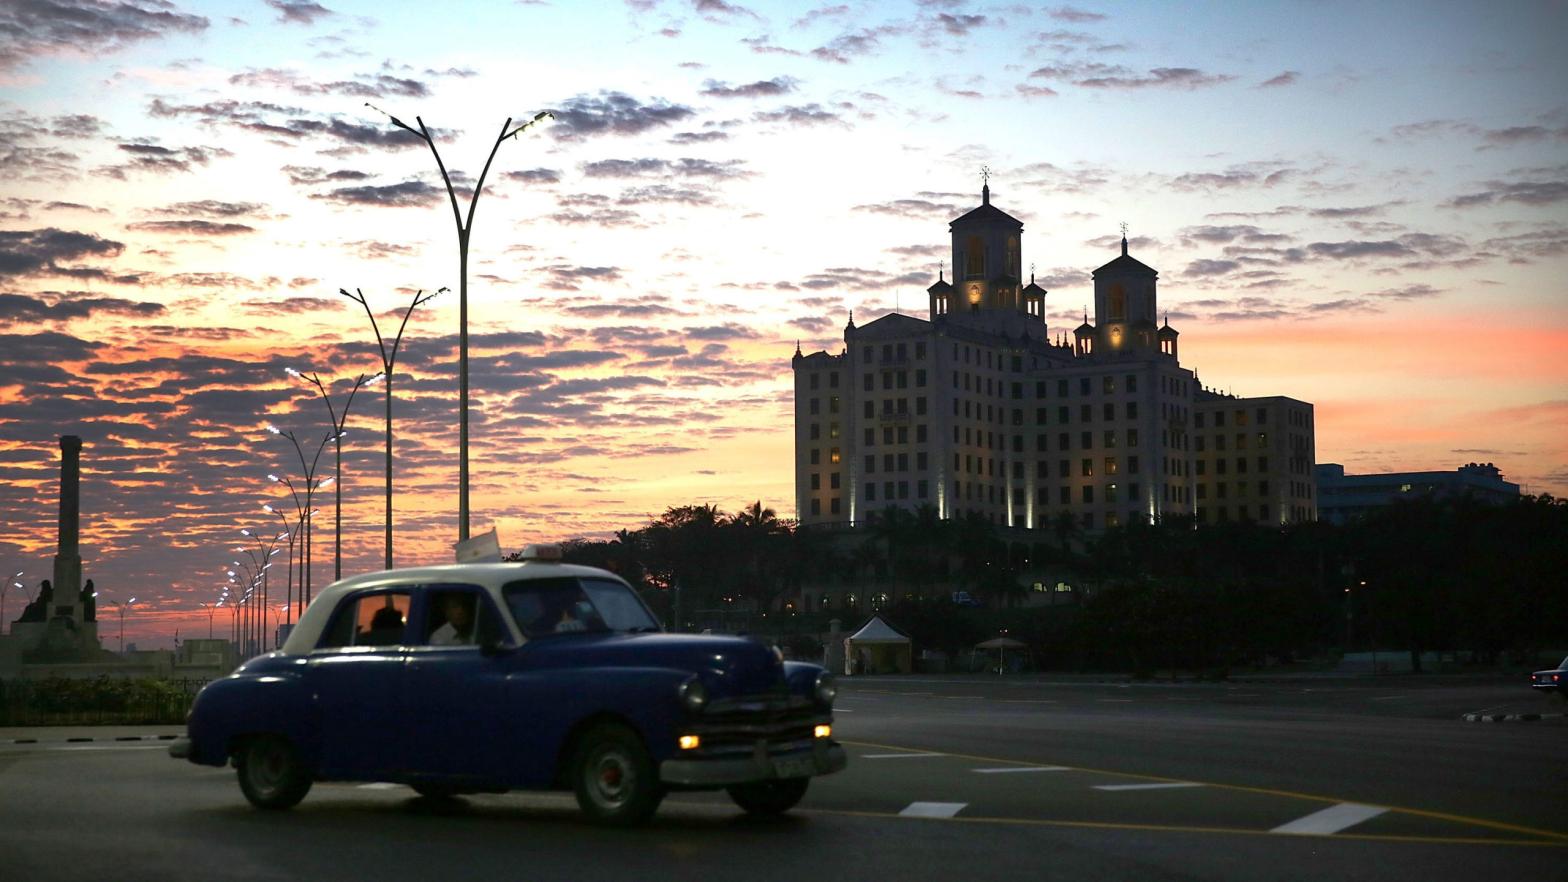 The hotel Nacional is seen as Cuba prepares for the visit of U.S. president Barack Obama on March 18, 2016 in Havana, Cuba.  (Photo: Joe Raedle, Getty Images)